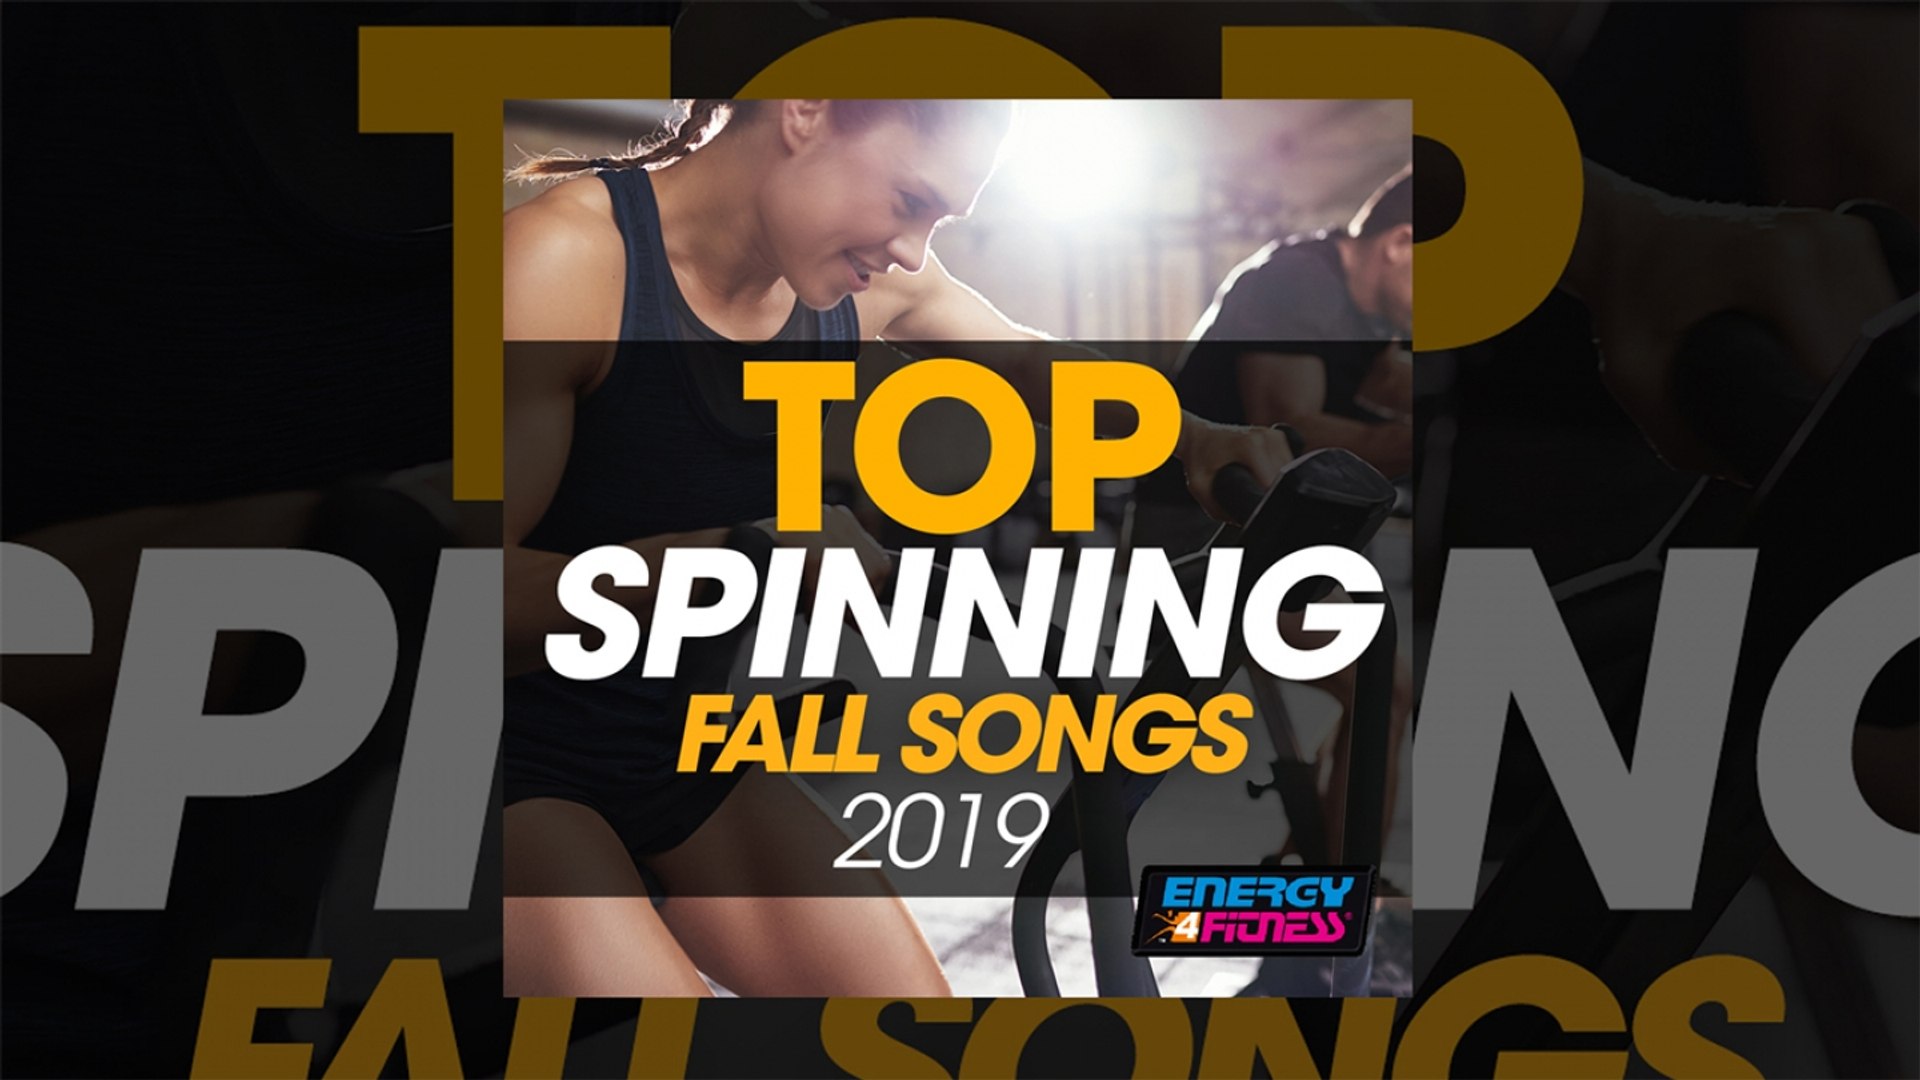 E4F - Top Spinning Fall Songs 2019 - Fitness & Music 2019